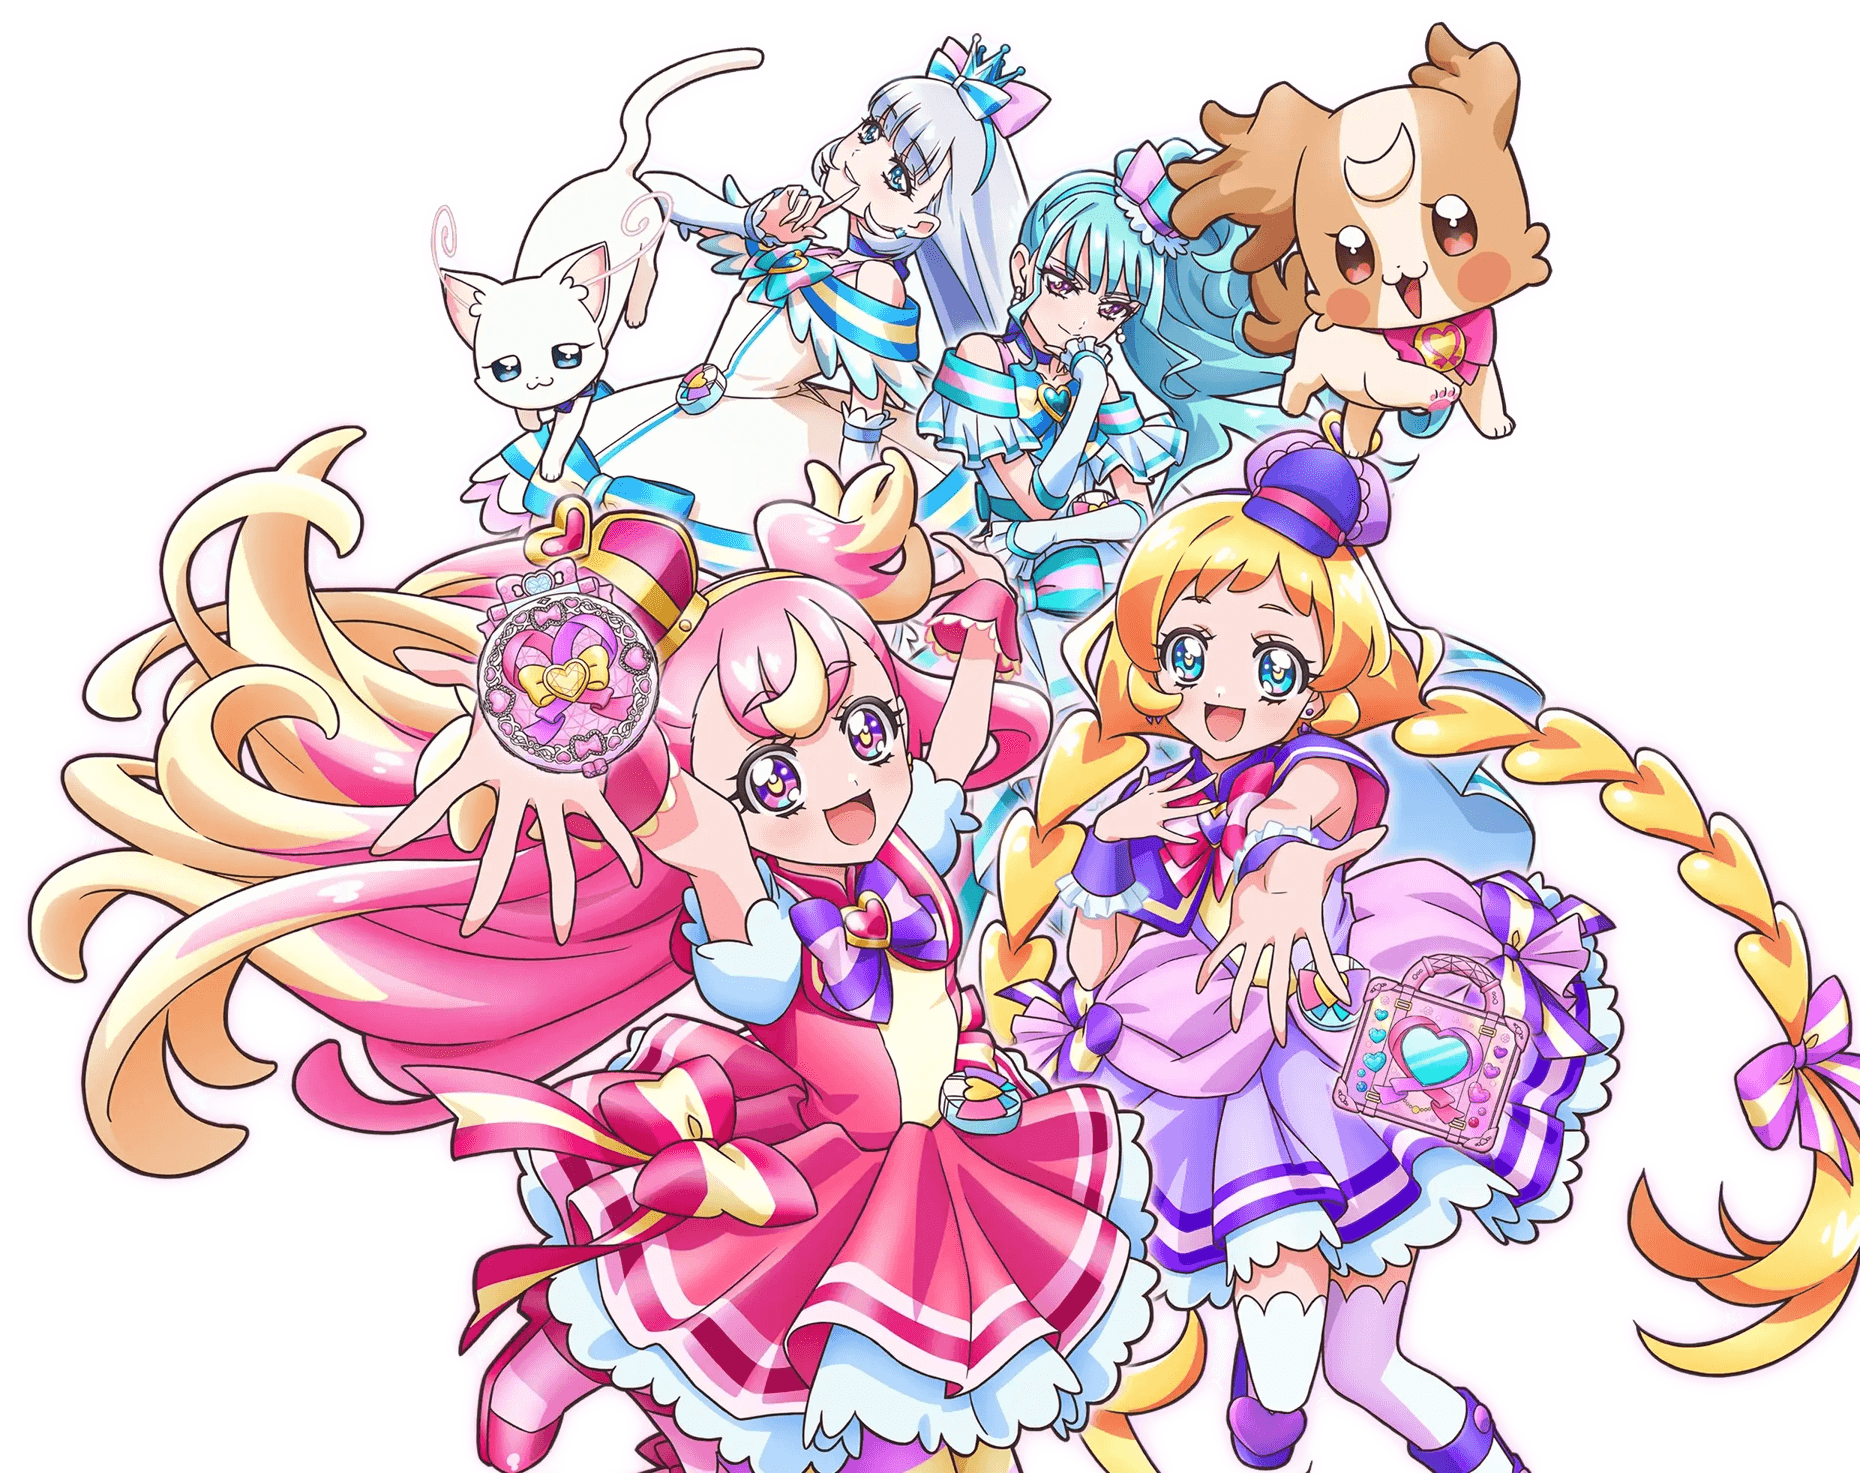 A picture of all four main characters from the anime Wonderful Pretty Cure!